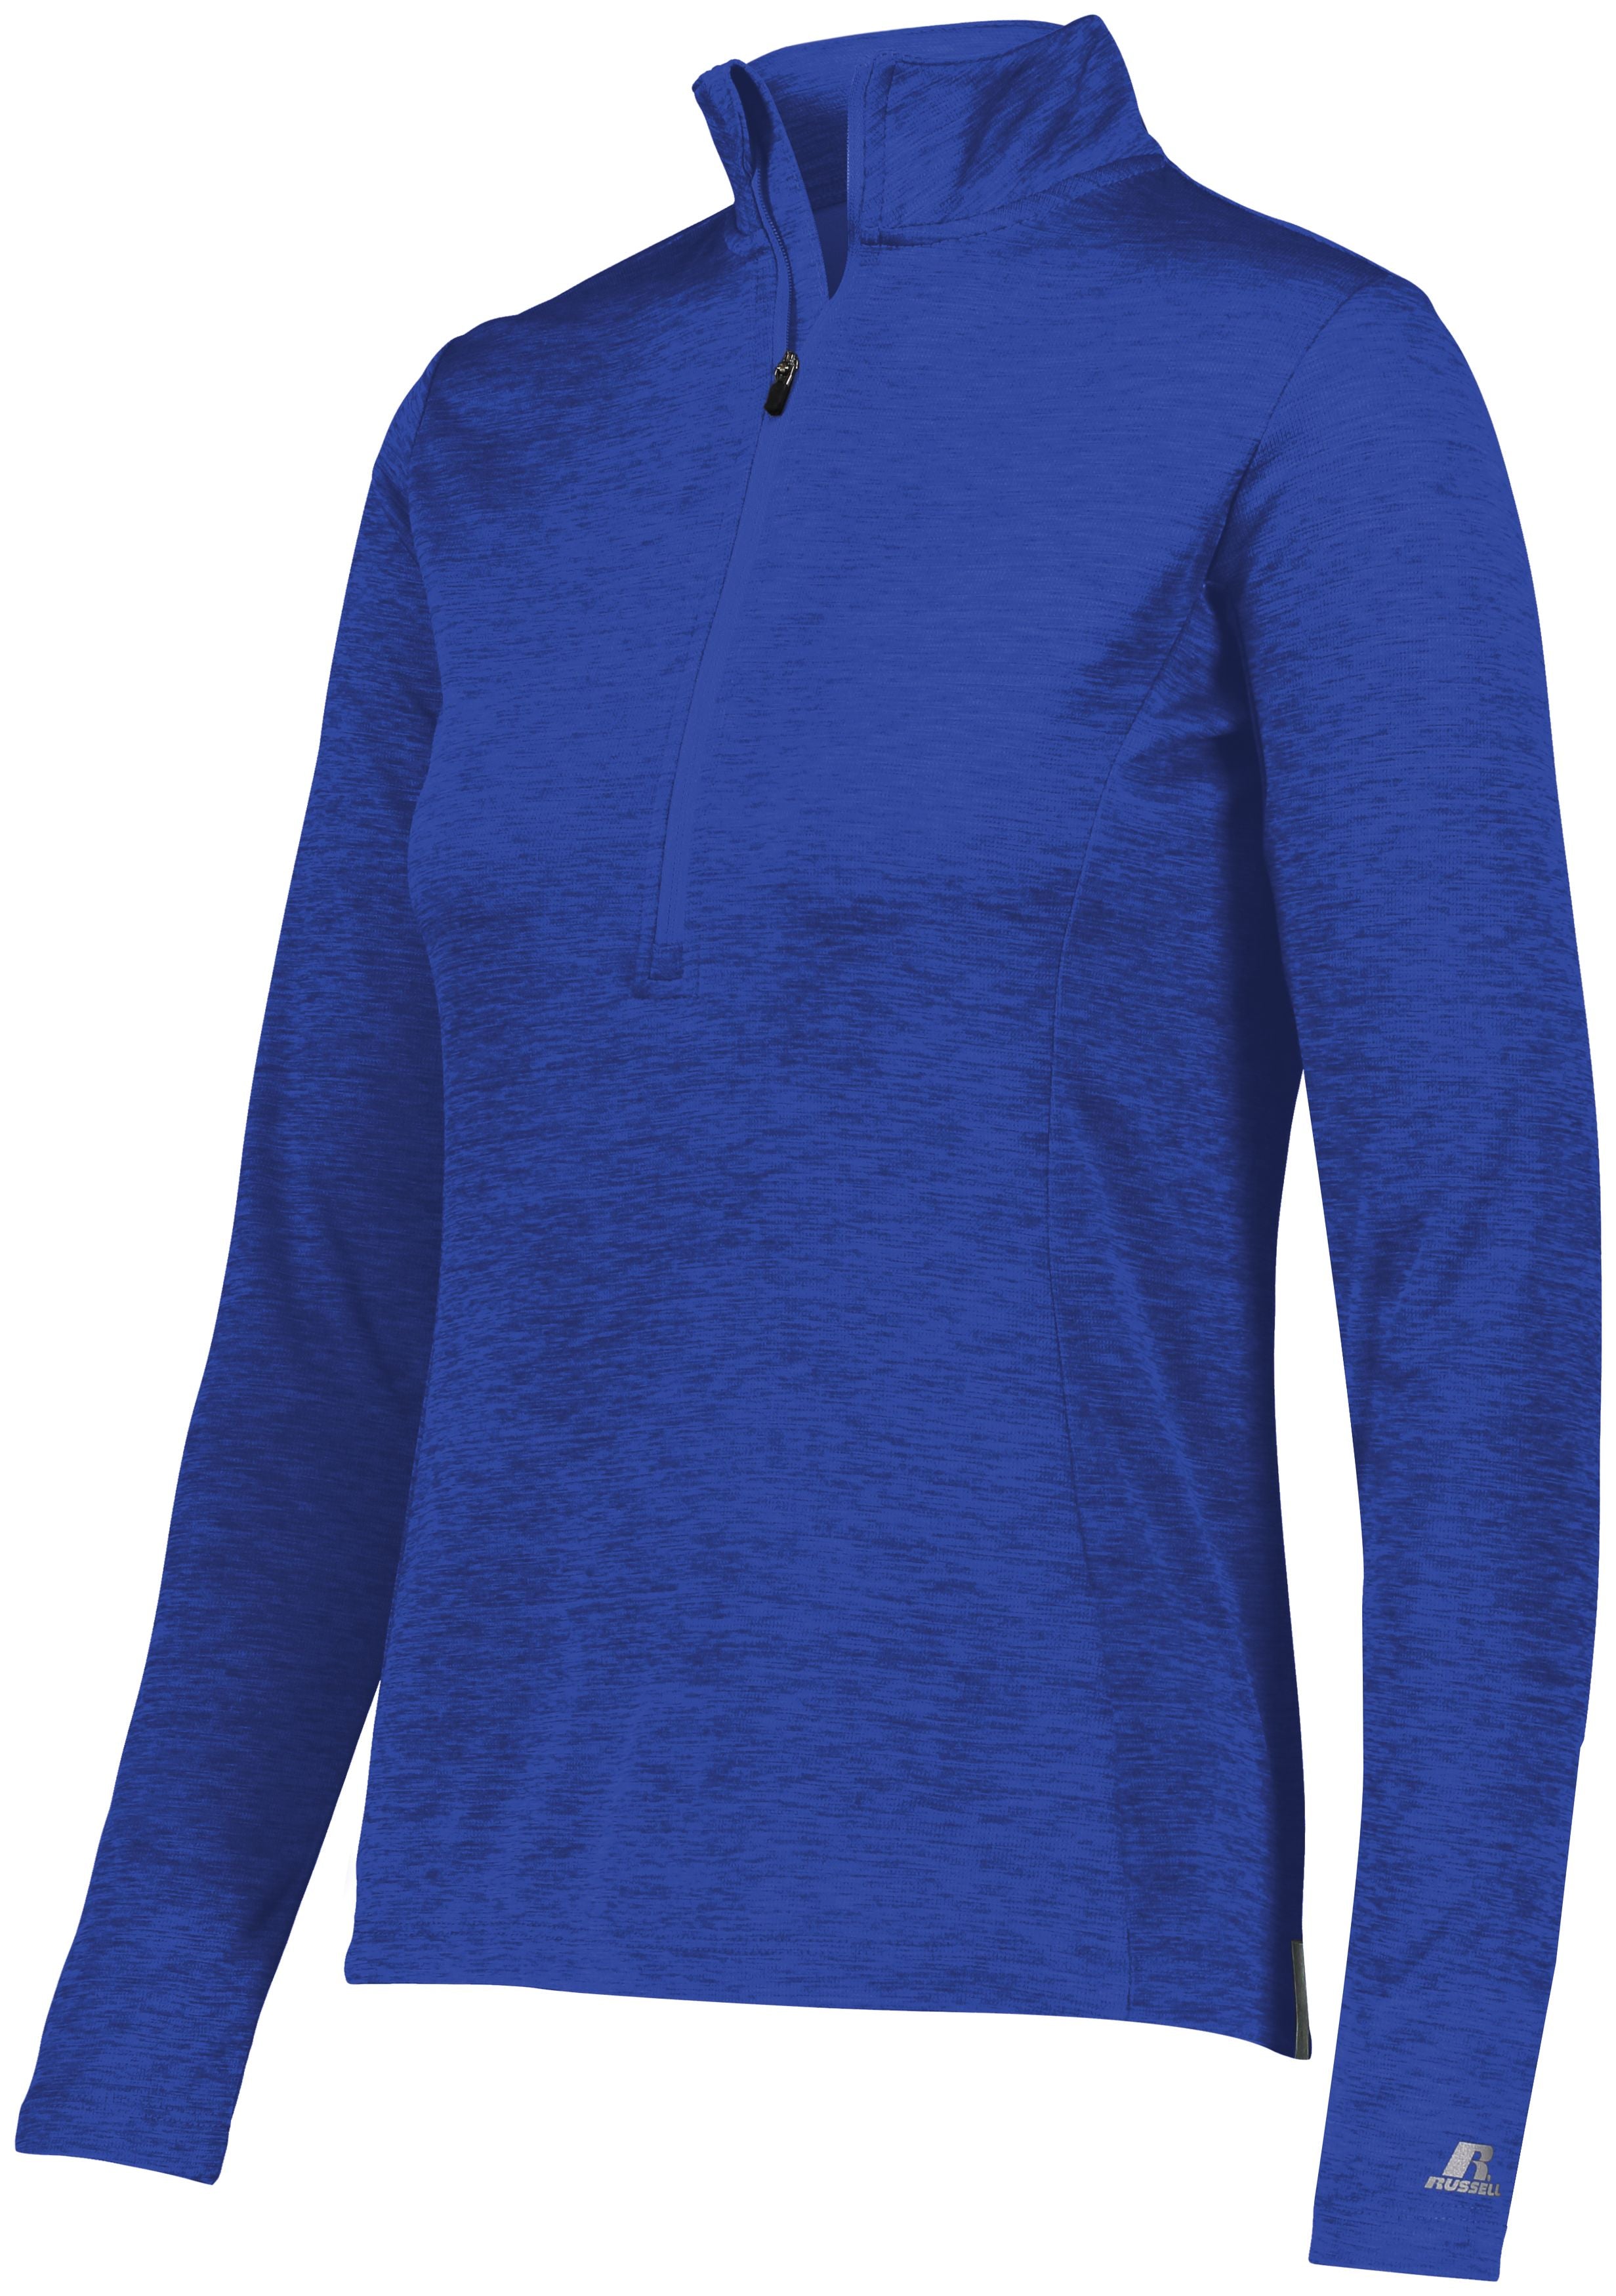 Russell Athletic Ladies Dri-Power Lightweight 1/4 Zip Pullover in Royal  -Part of the Ladies, Russell-Athletic-Products, Shirts product lines at KanaleyCreations.com